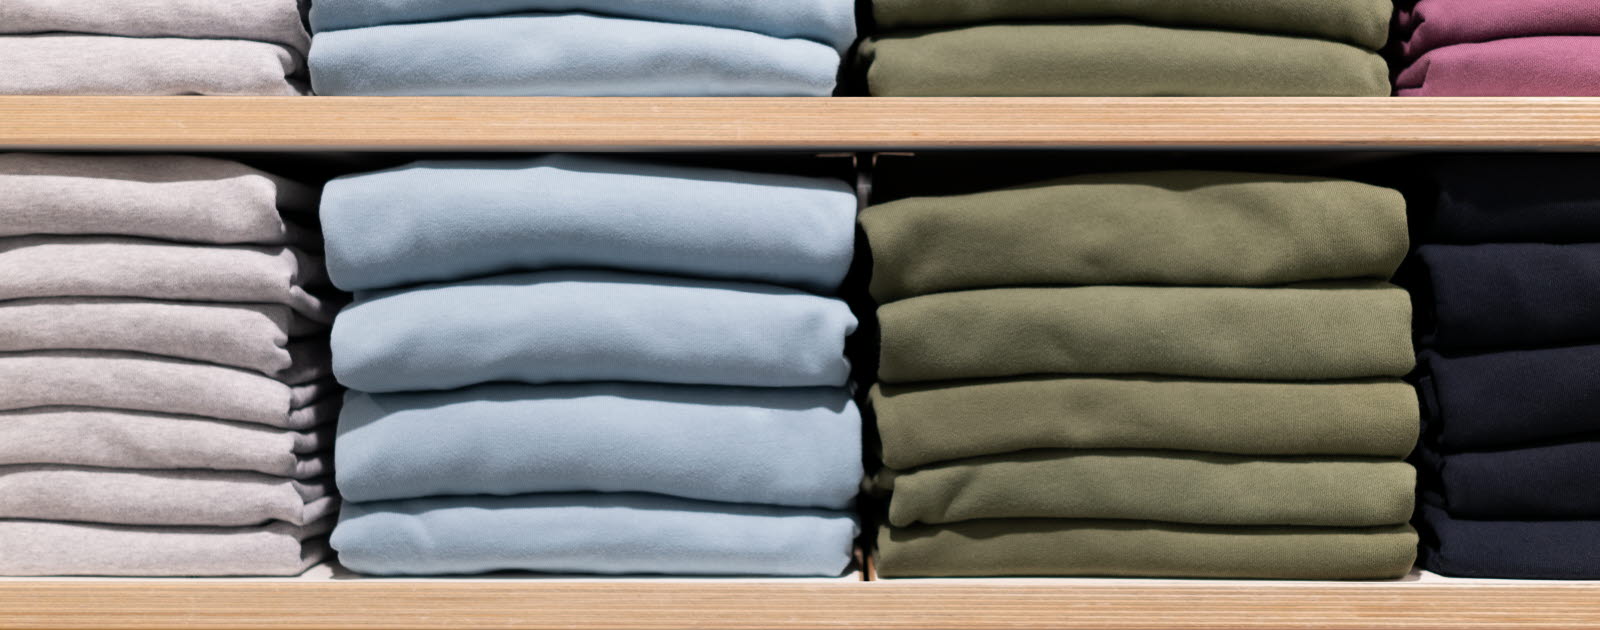 Stacks of folded clothes on wooden shelves.